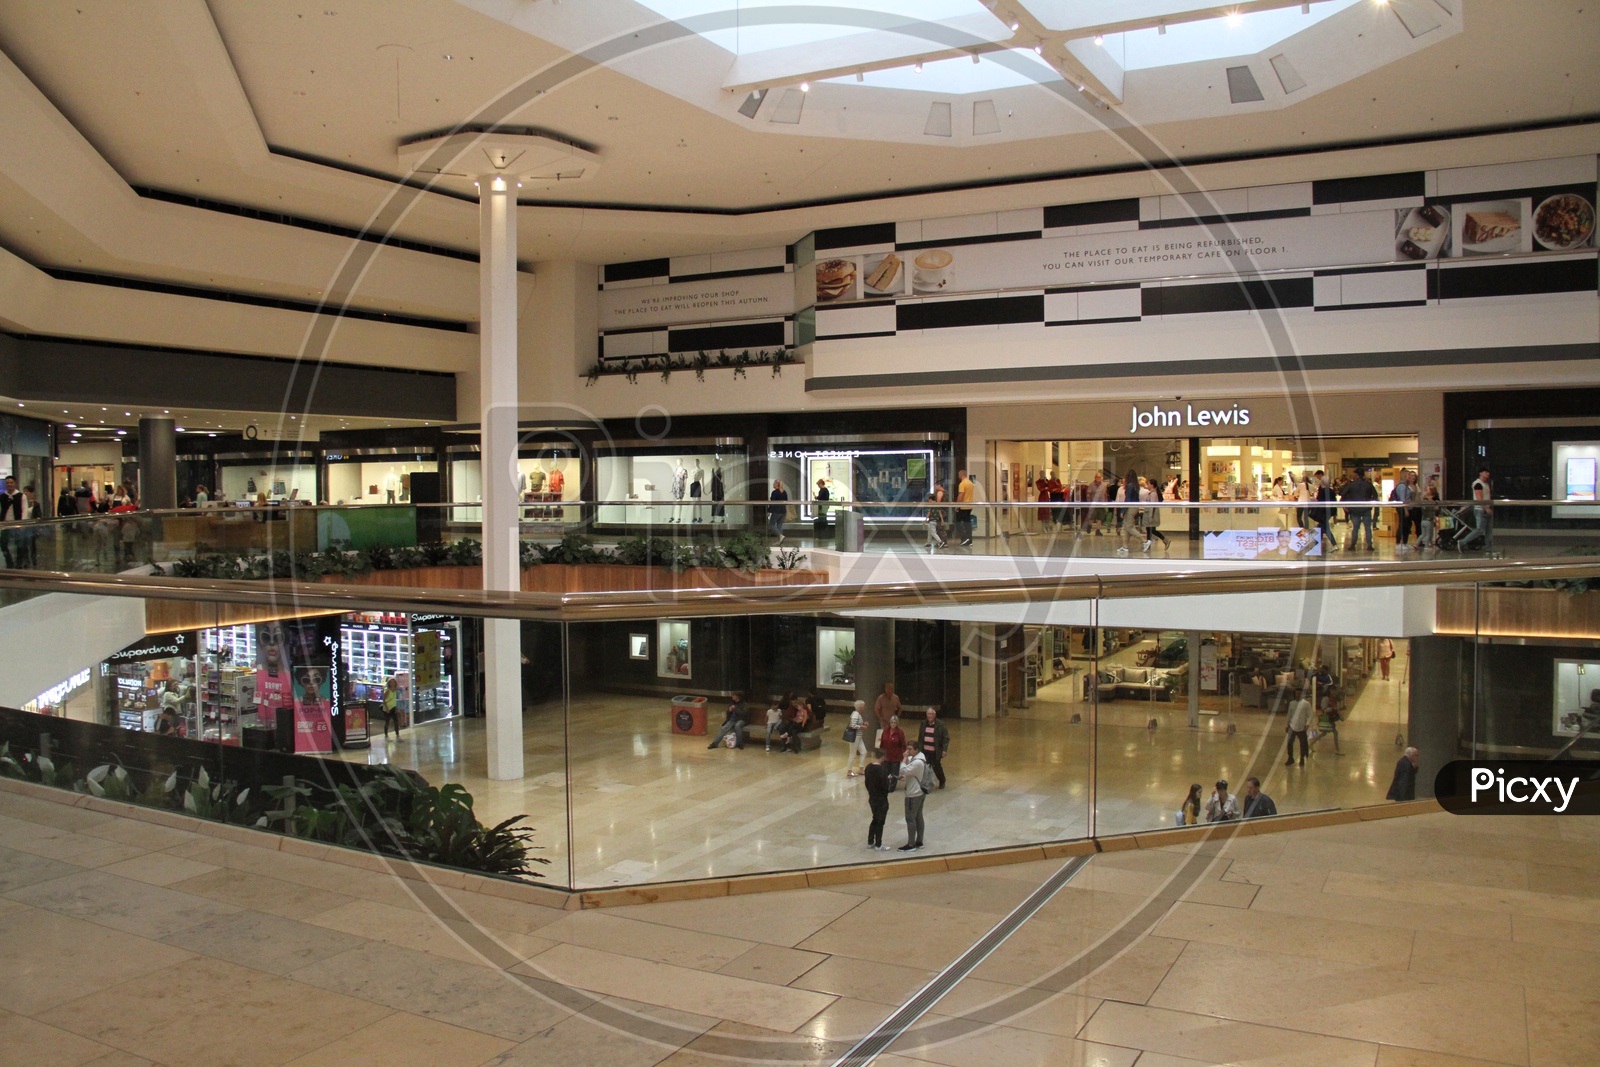 Inside View of a Shopping Mall in London